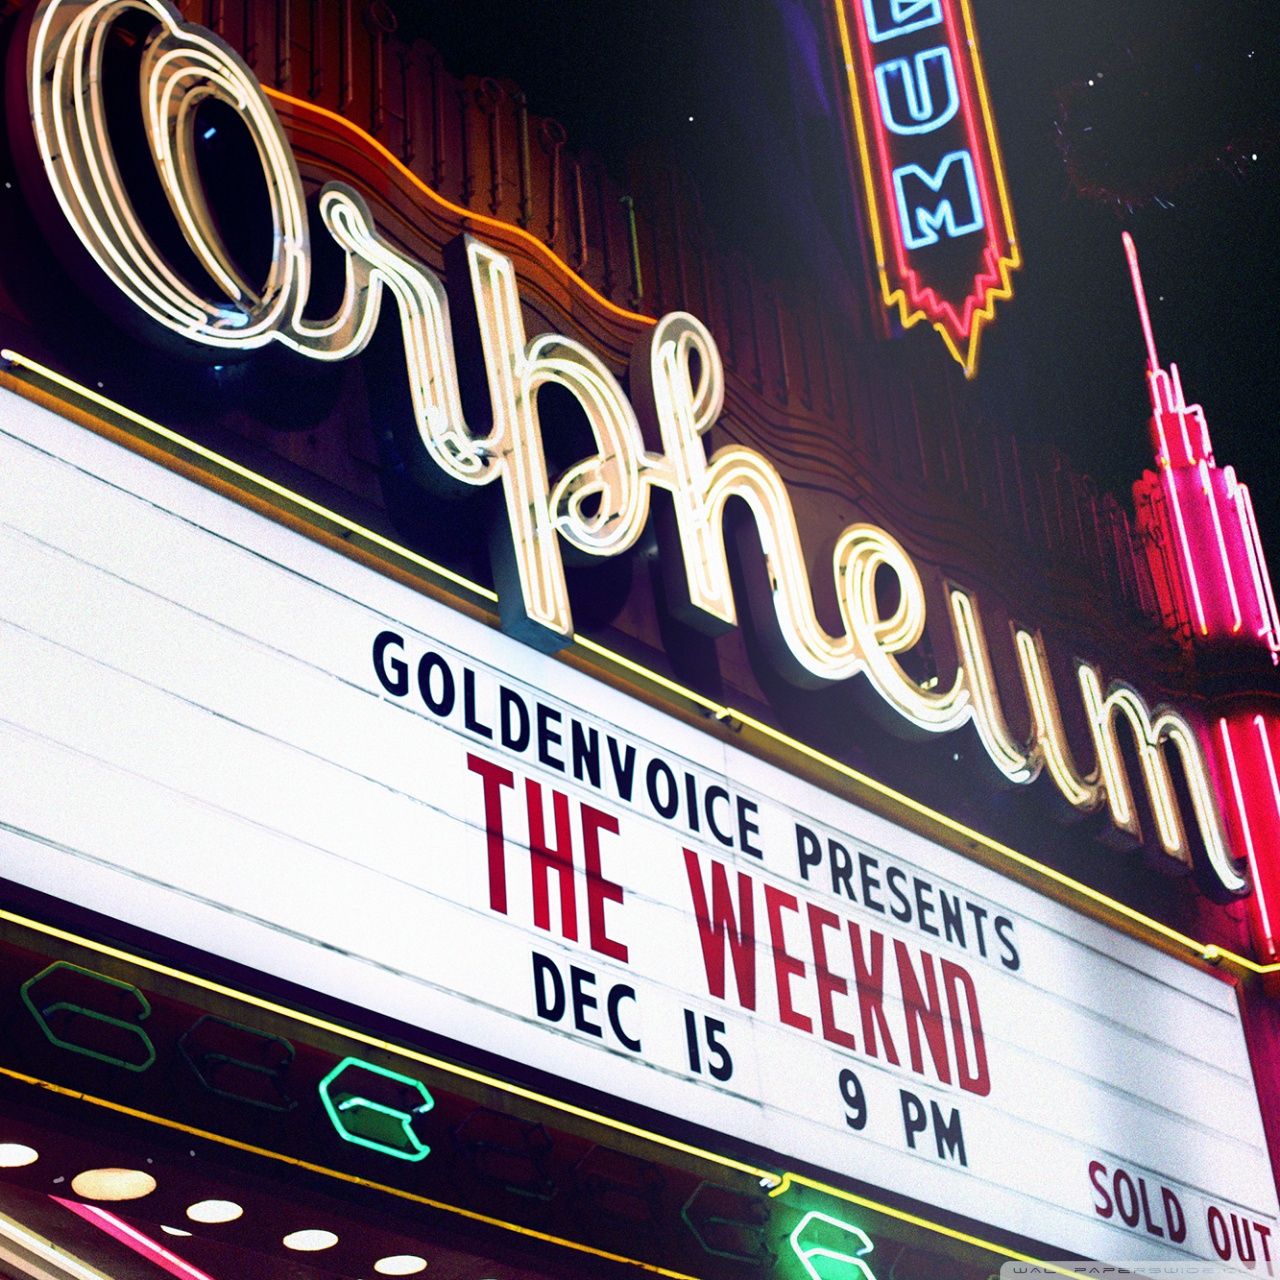 A marquee for a concert featuring The Weeknd. - The Weeknd